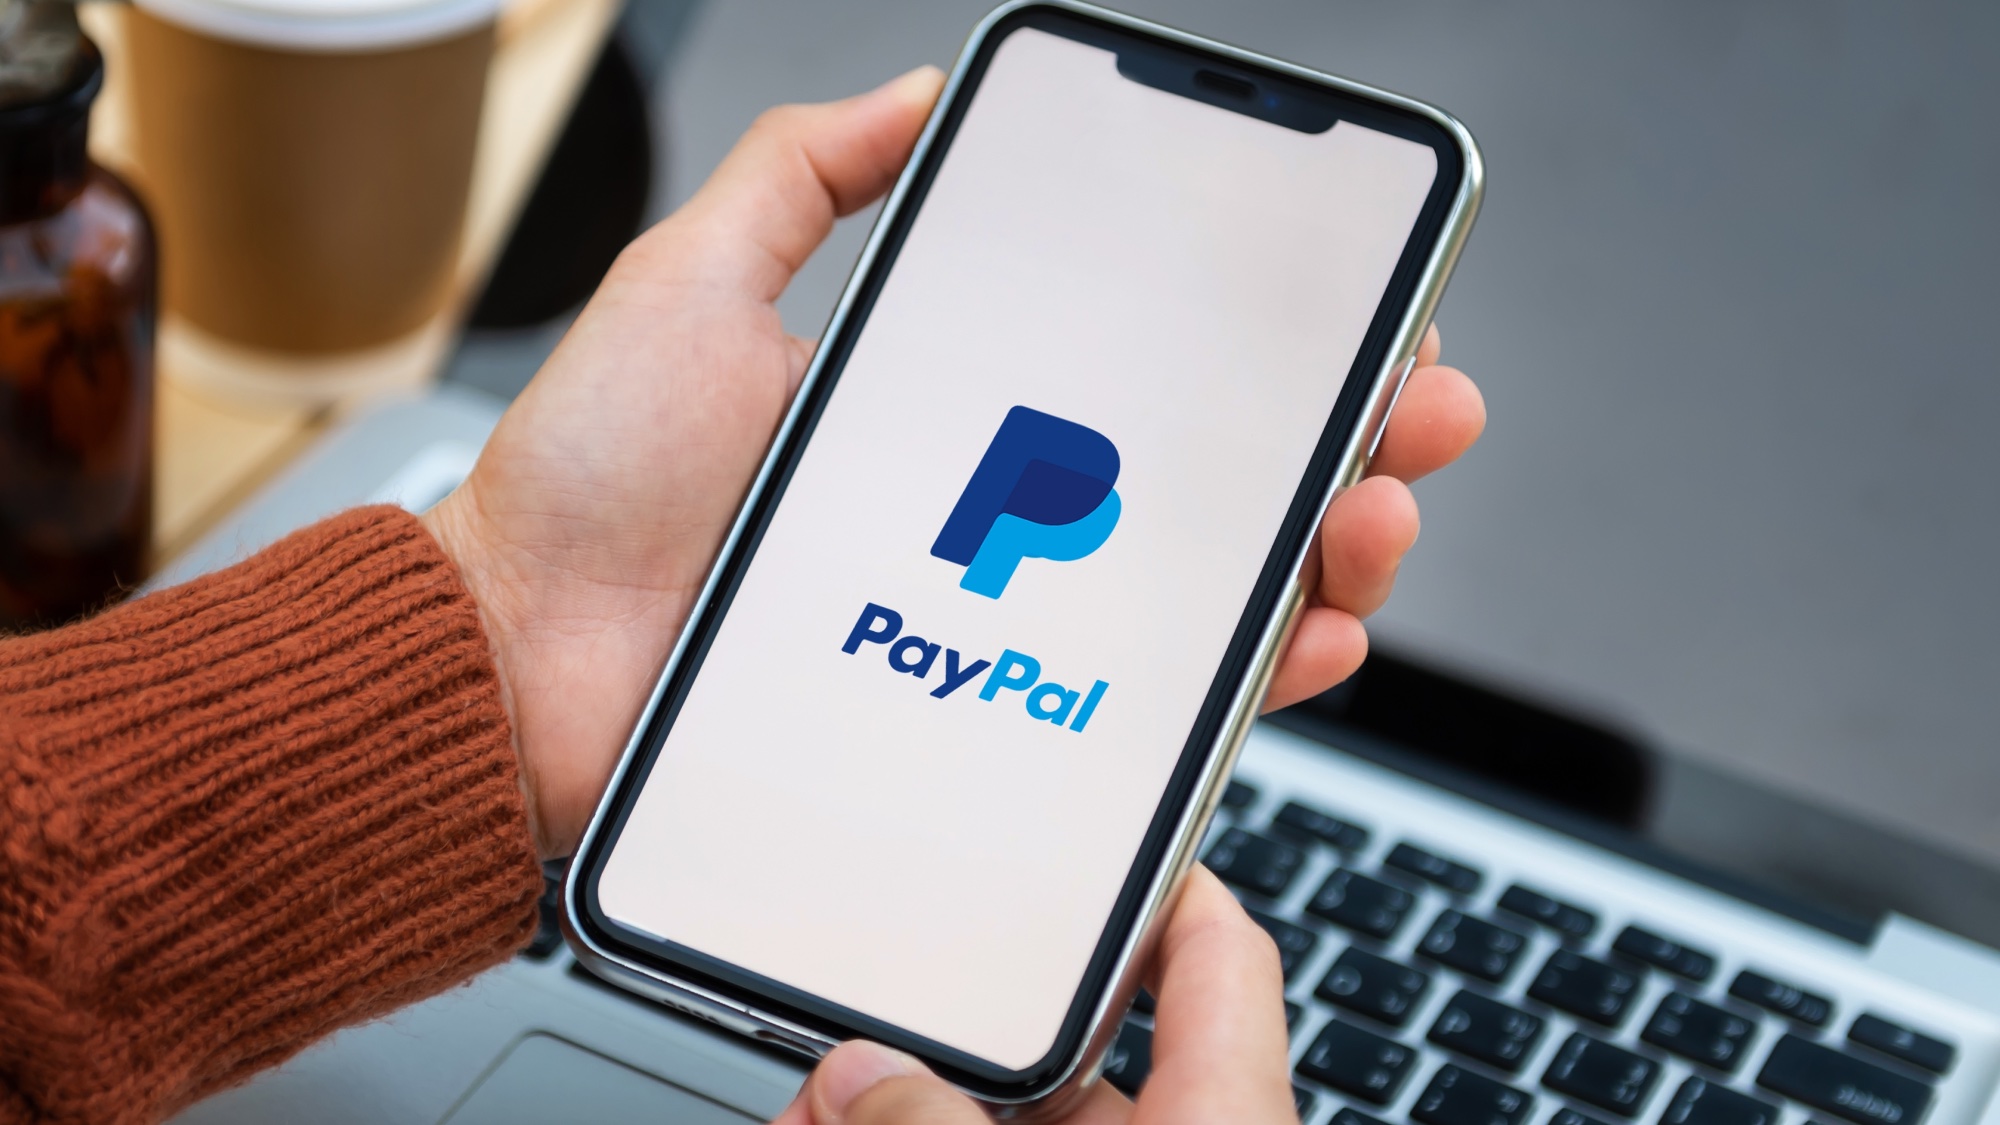 PayPal Login: Log in to Your PayPal Account